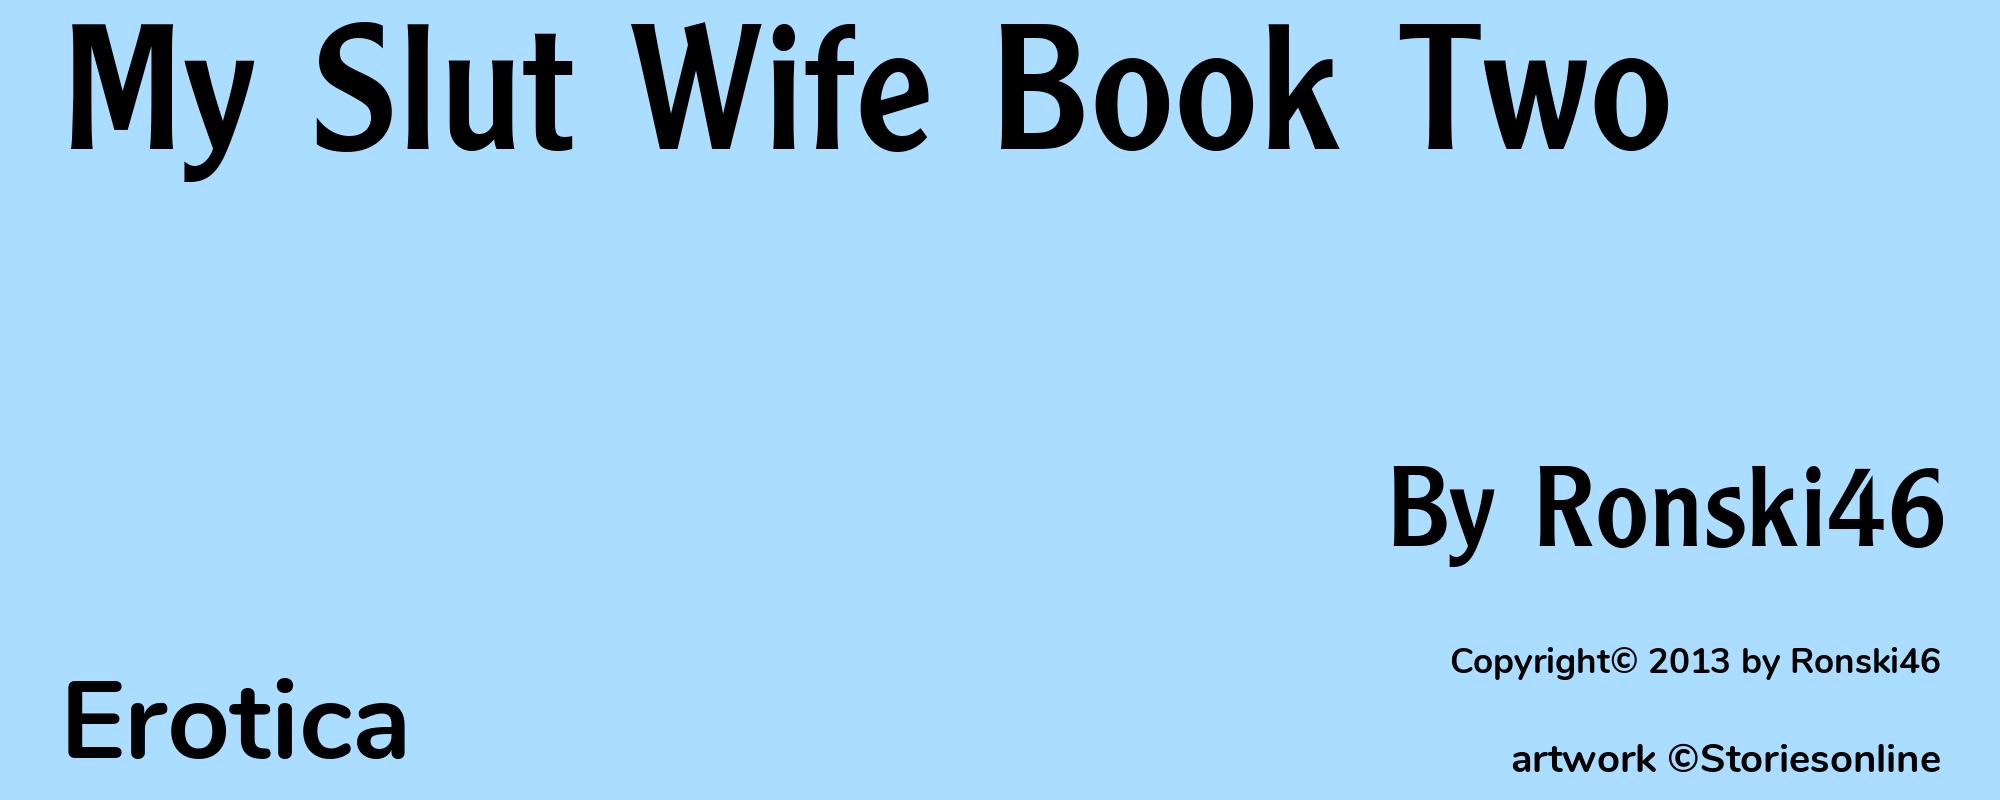 My Slut Wife Book Two - Cover